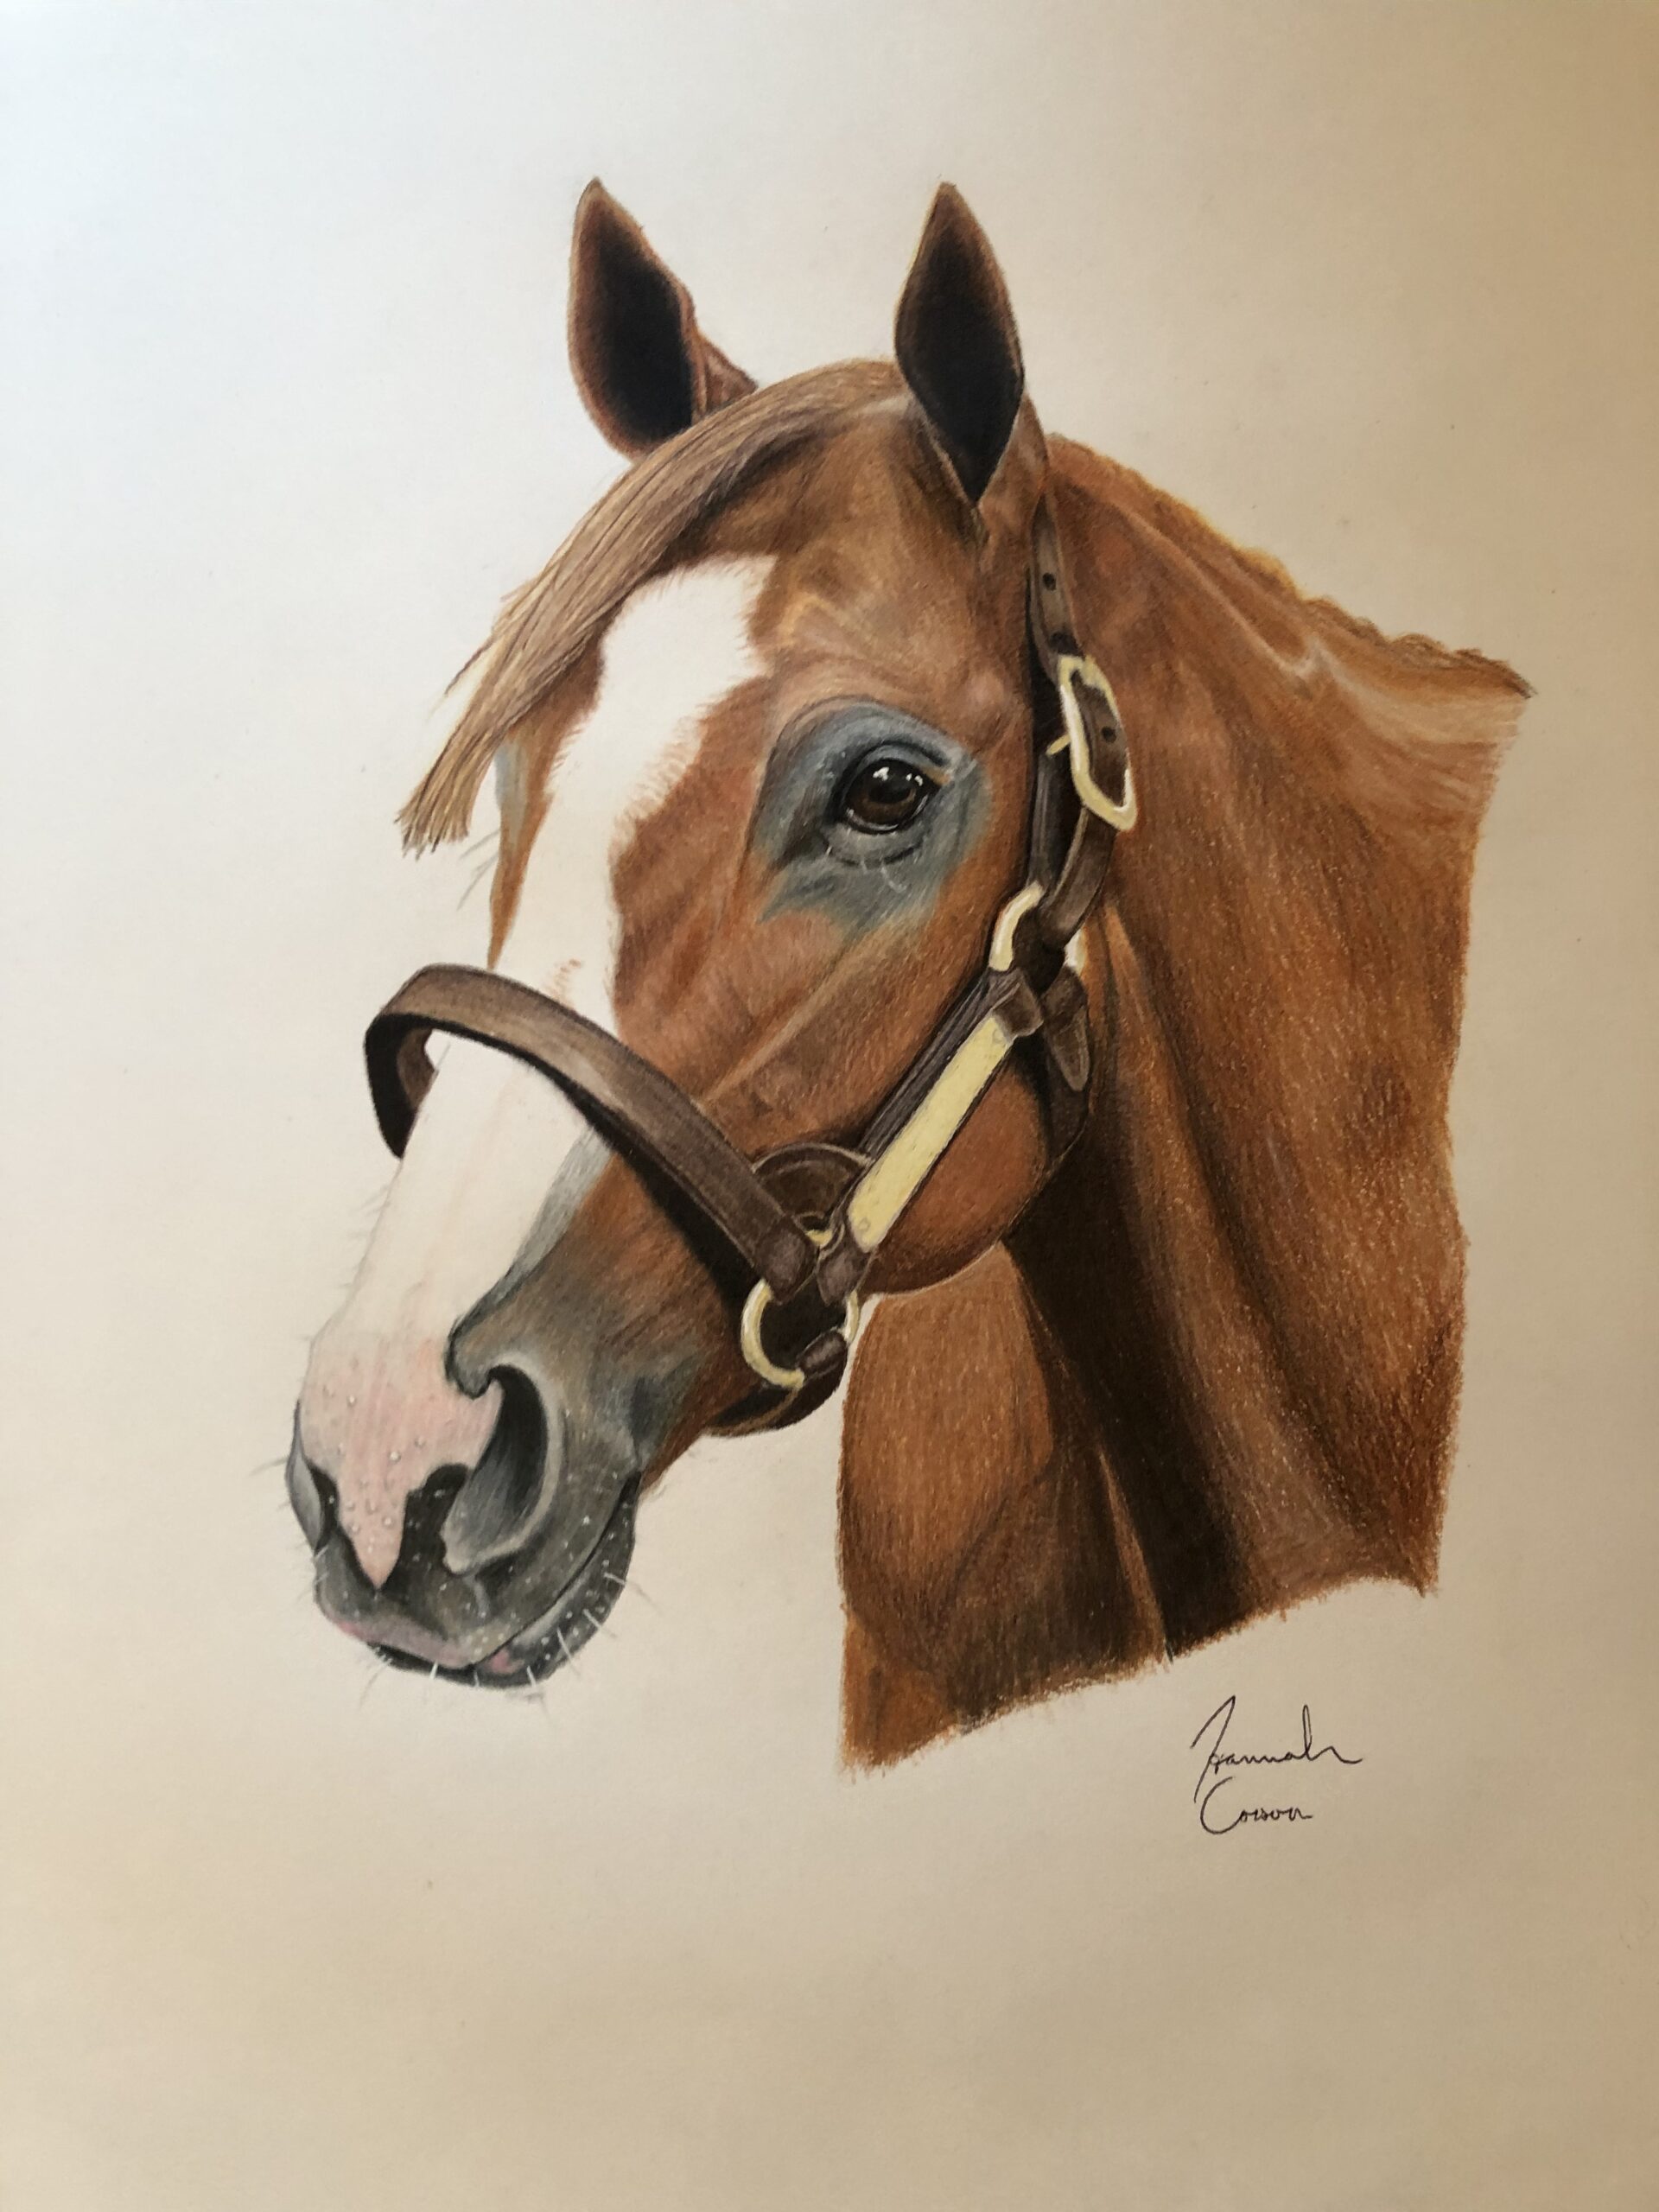 A colored pencil drawing of a brown horse with a white nose.